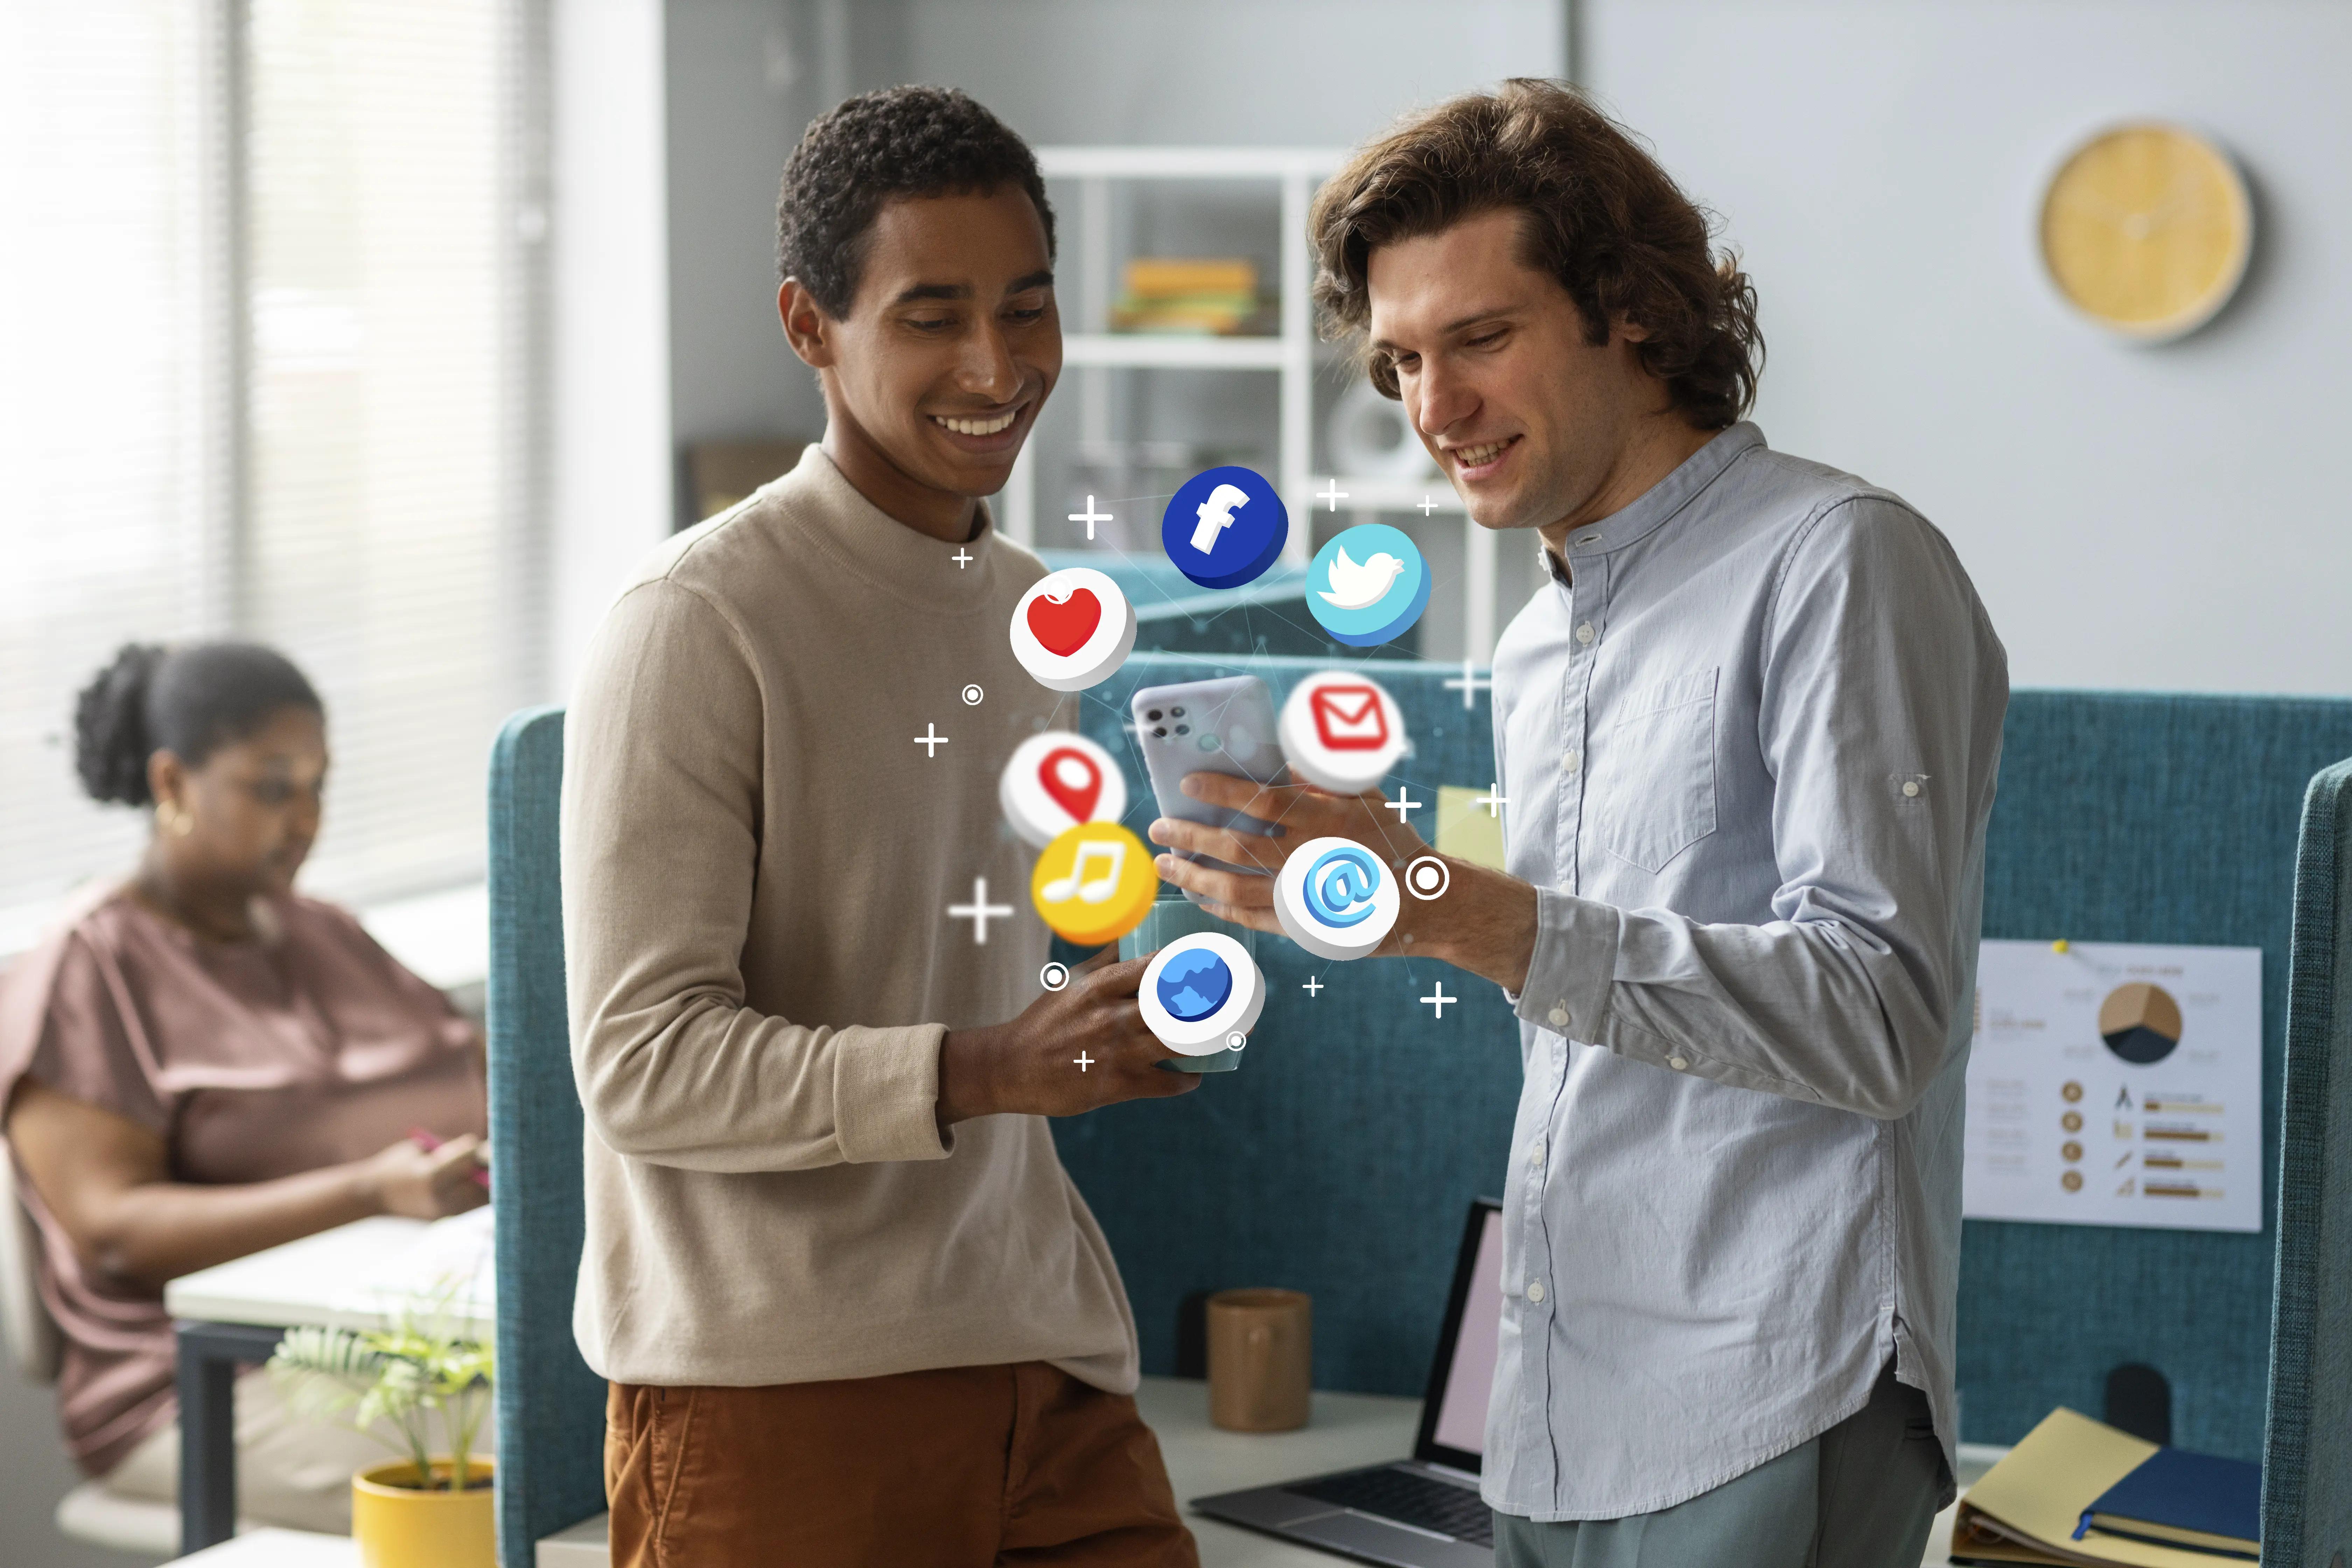 Two men engaging with a smartphone displaying various social media icons, suggesting a discussion on digital marketing strategies, in a modern office environment with a colleague working in the background